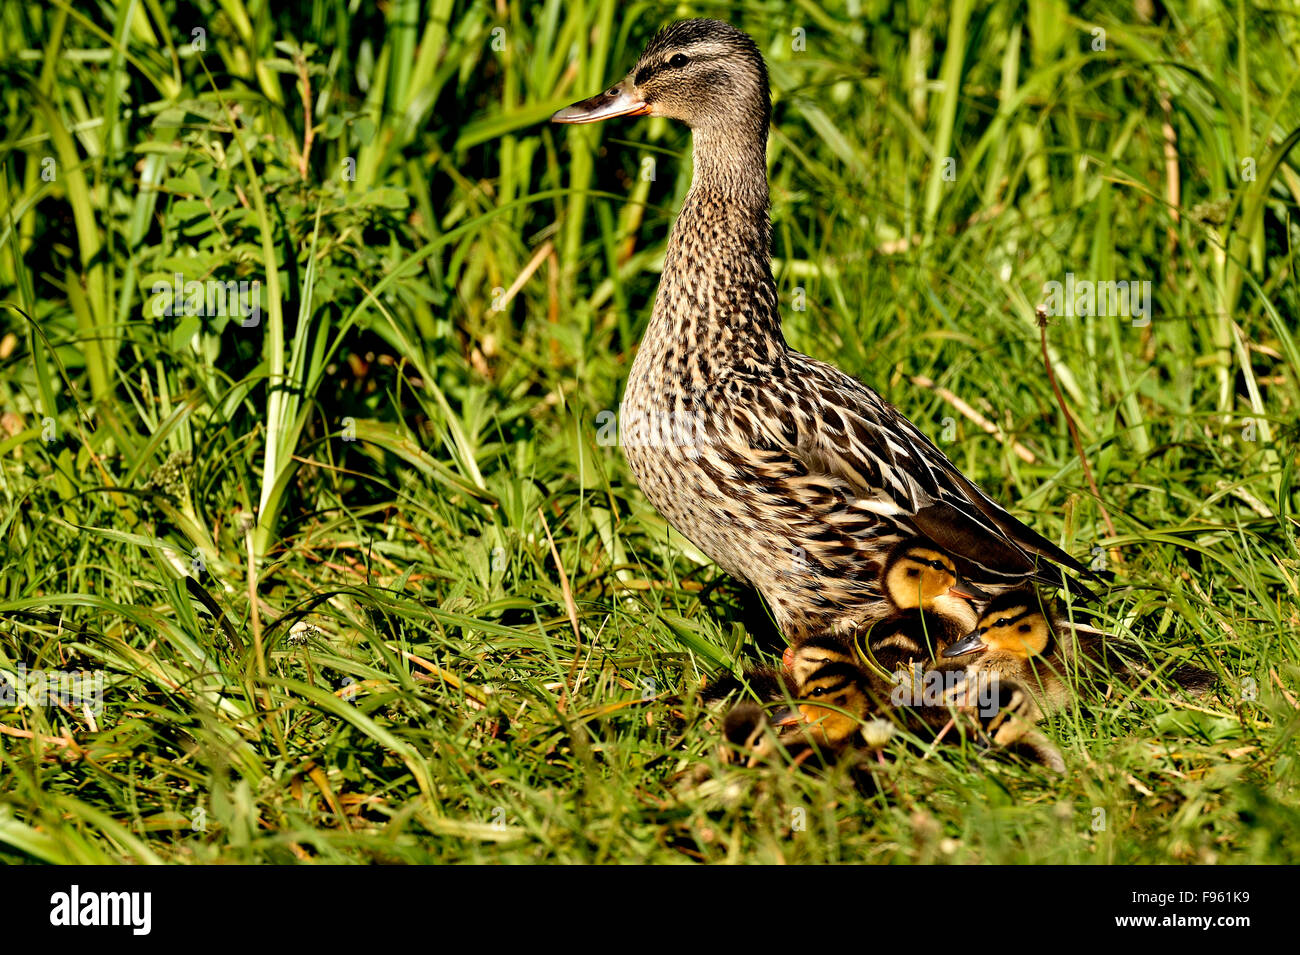 A female Mallard Duck, Anas platyrhynchos, with a brood of new ducklings in the tall green grass Stock Photo